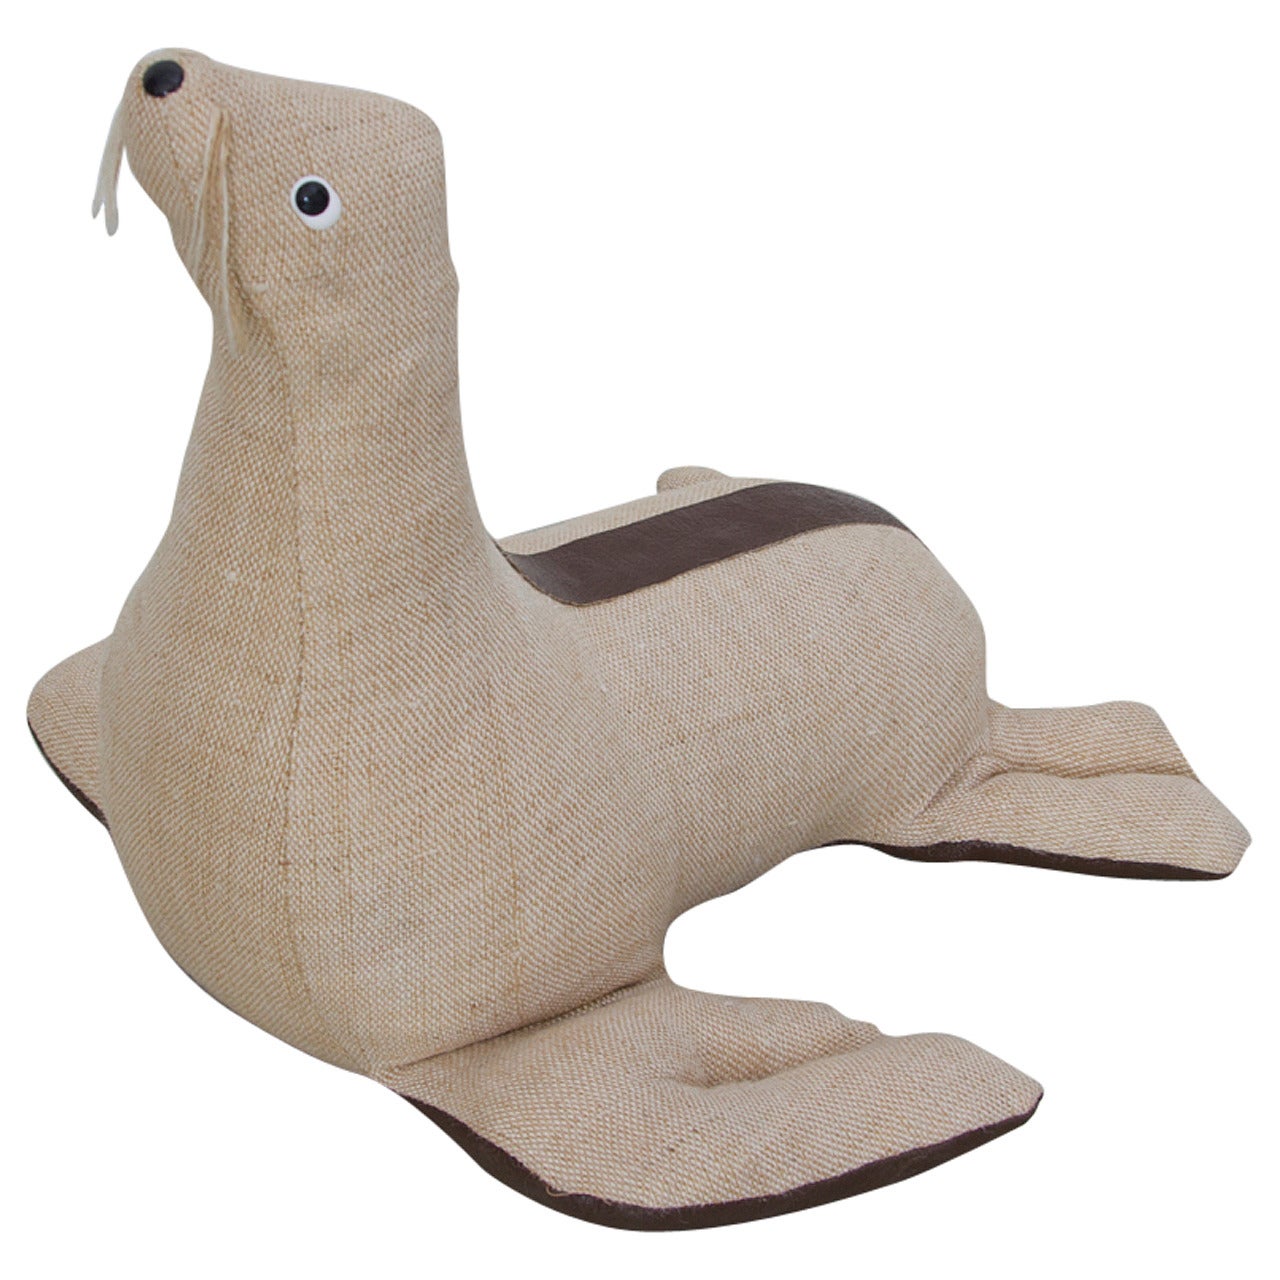 Rare Leather and Jute Therapeutic Toy Seal by Renate Muller For Sale